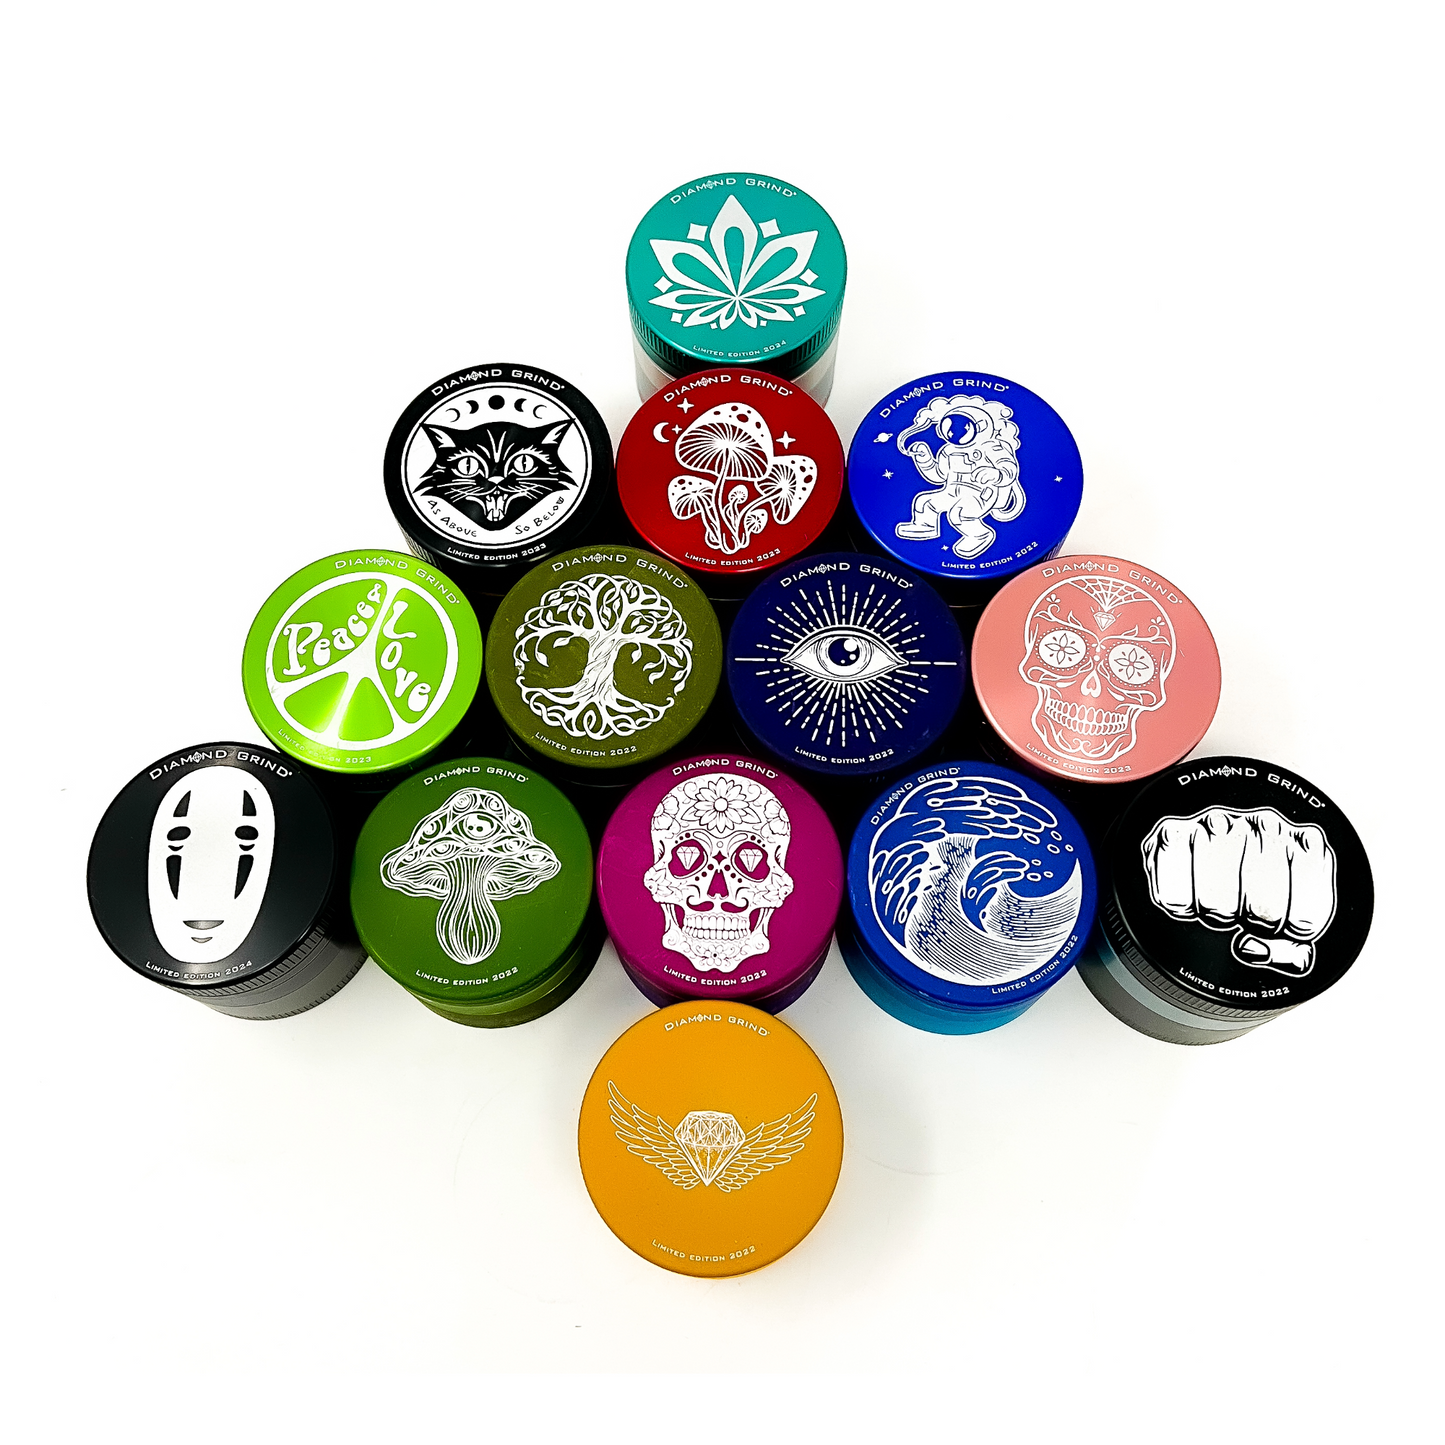 Diamond Grind Limited Edition Herb Grinder 56mm - 6th batch, numbered